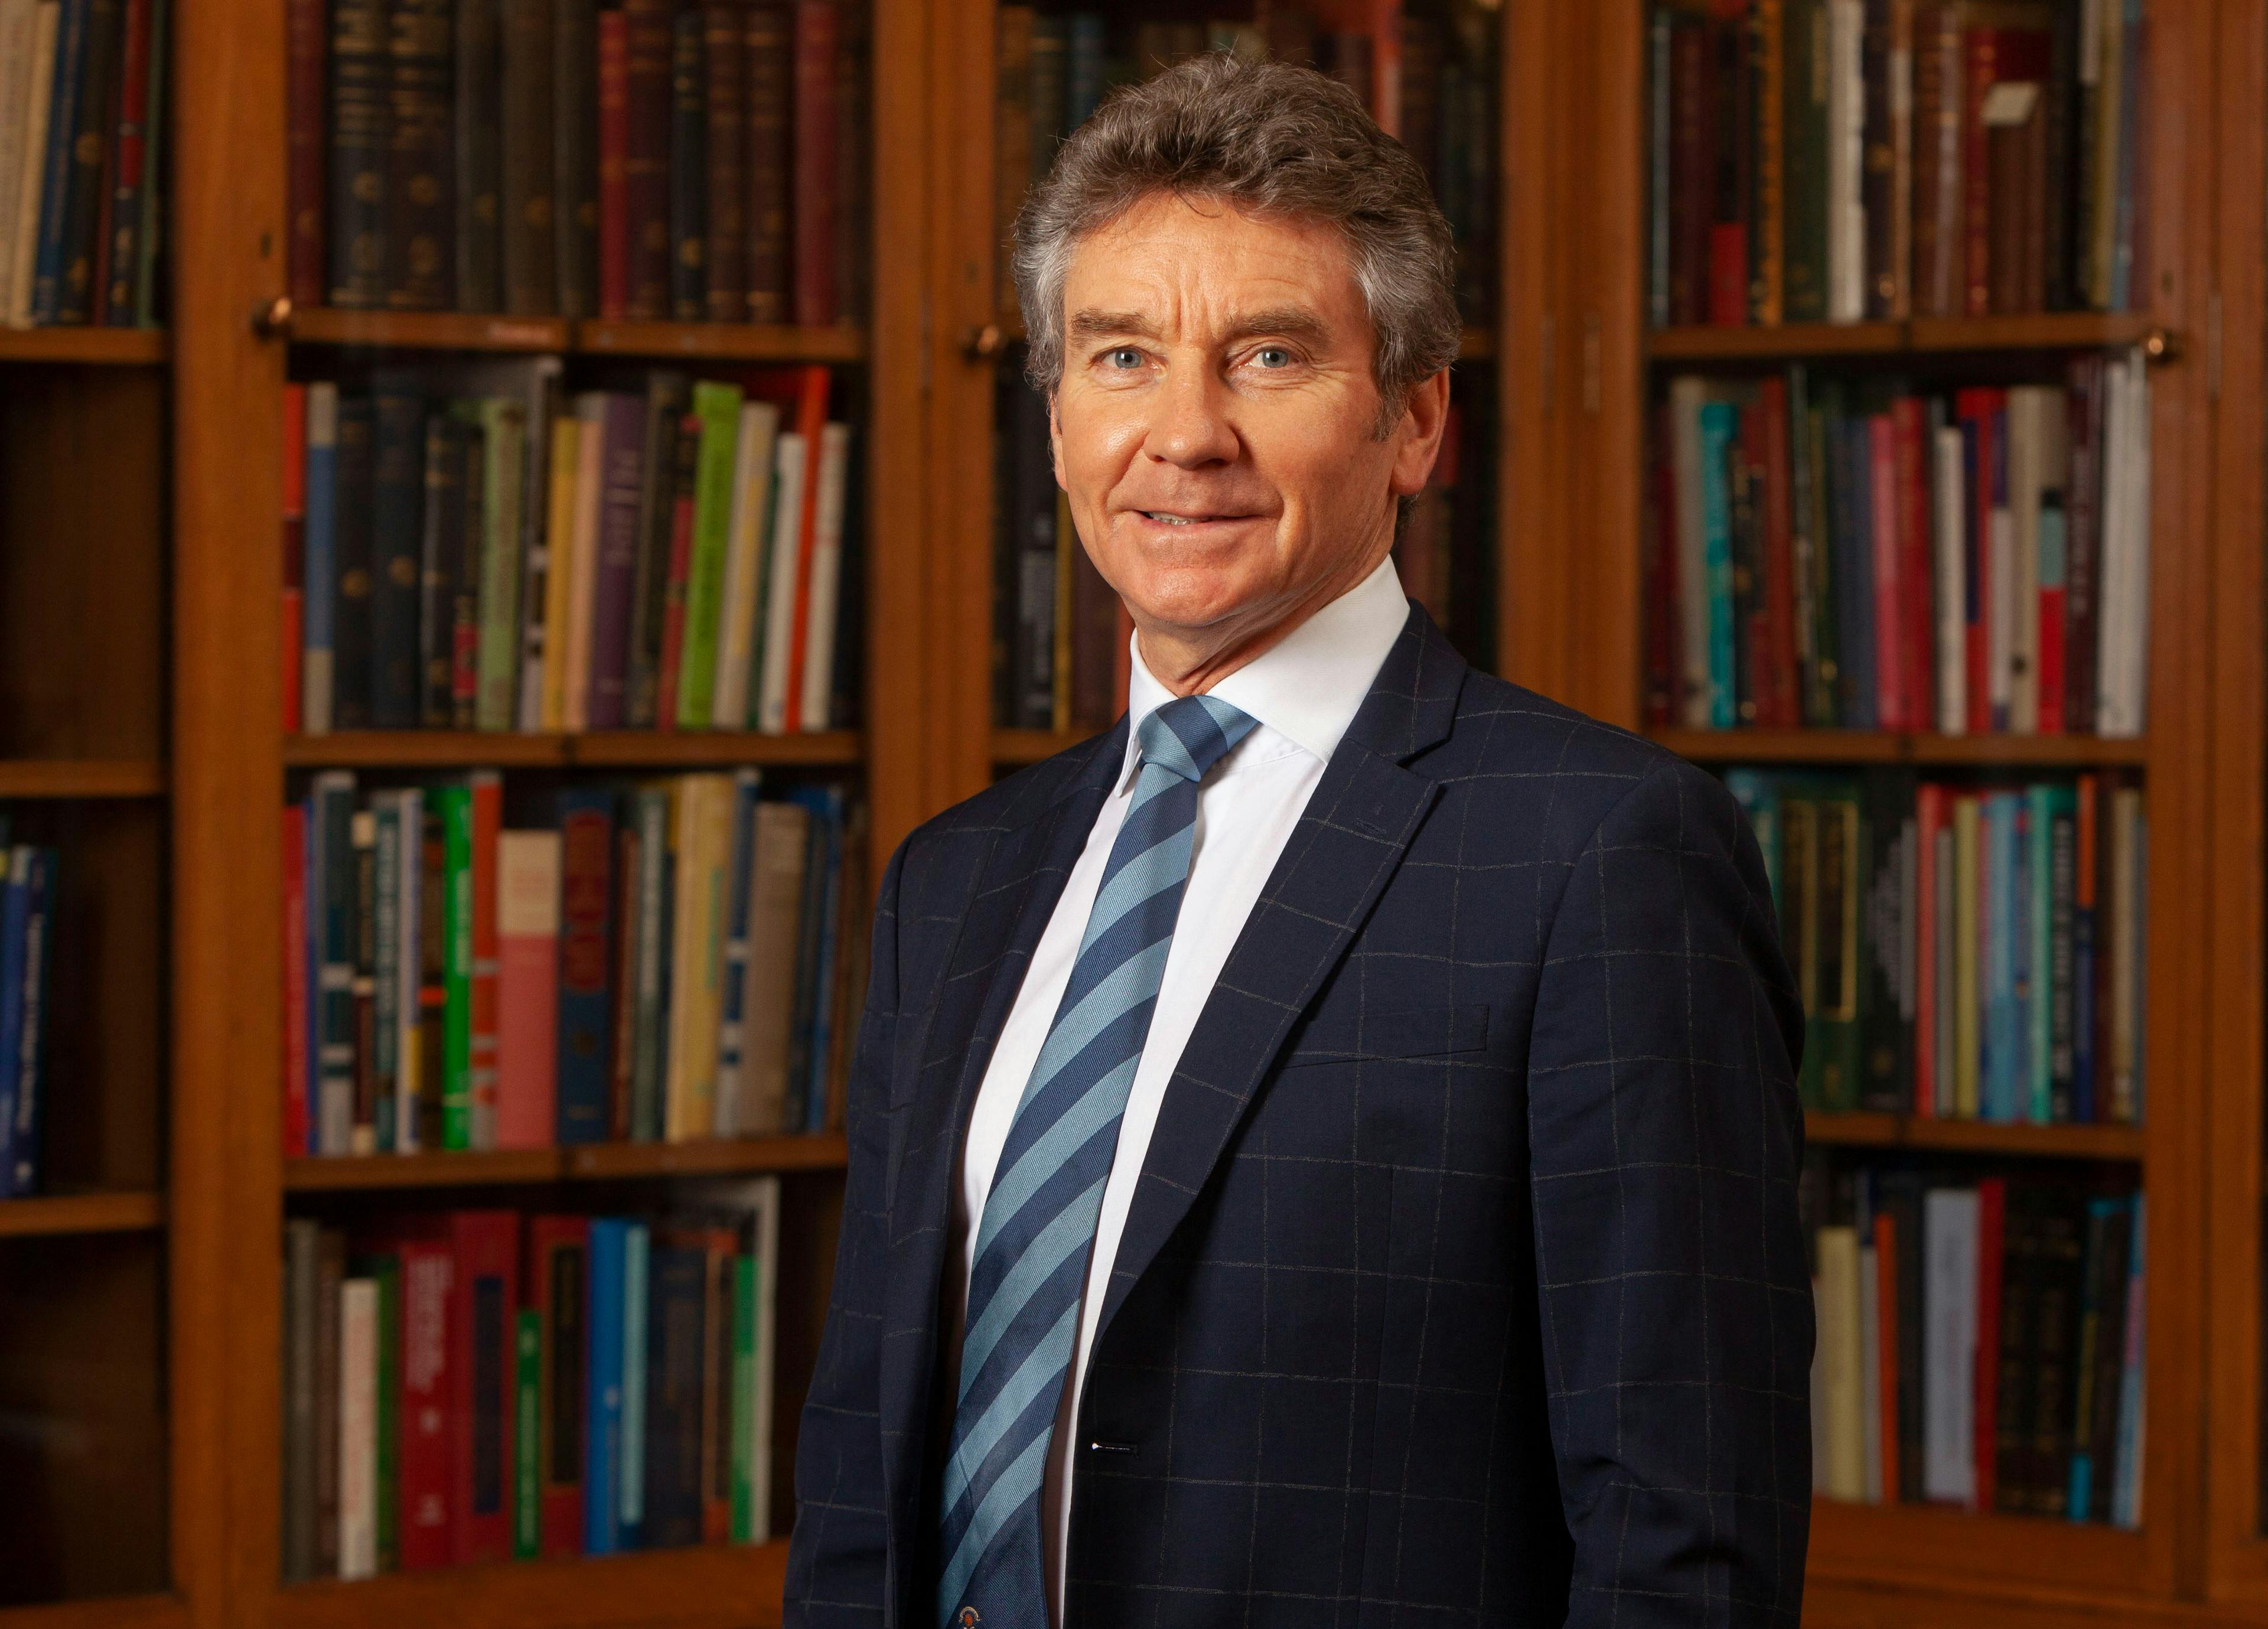 Professor Michael Griffin OBE, President of the RCSEd